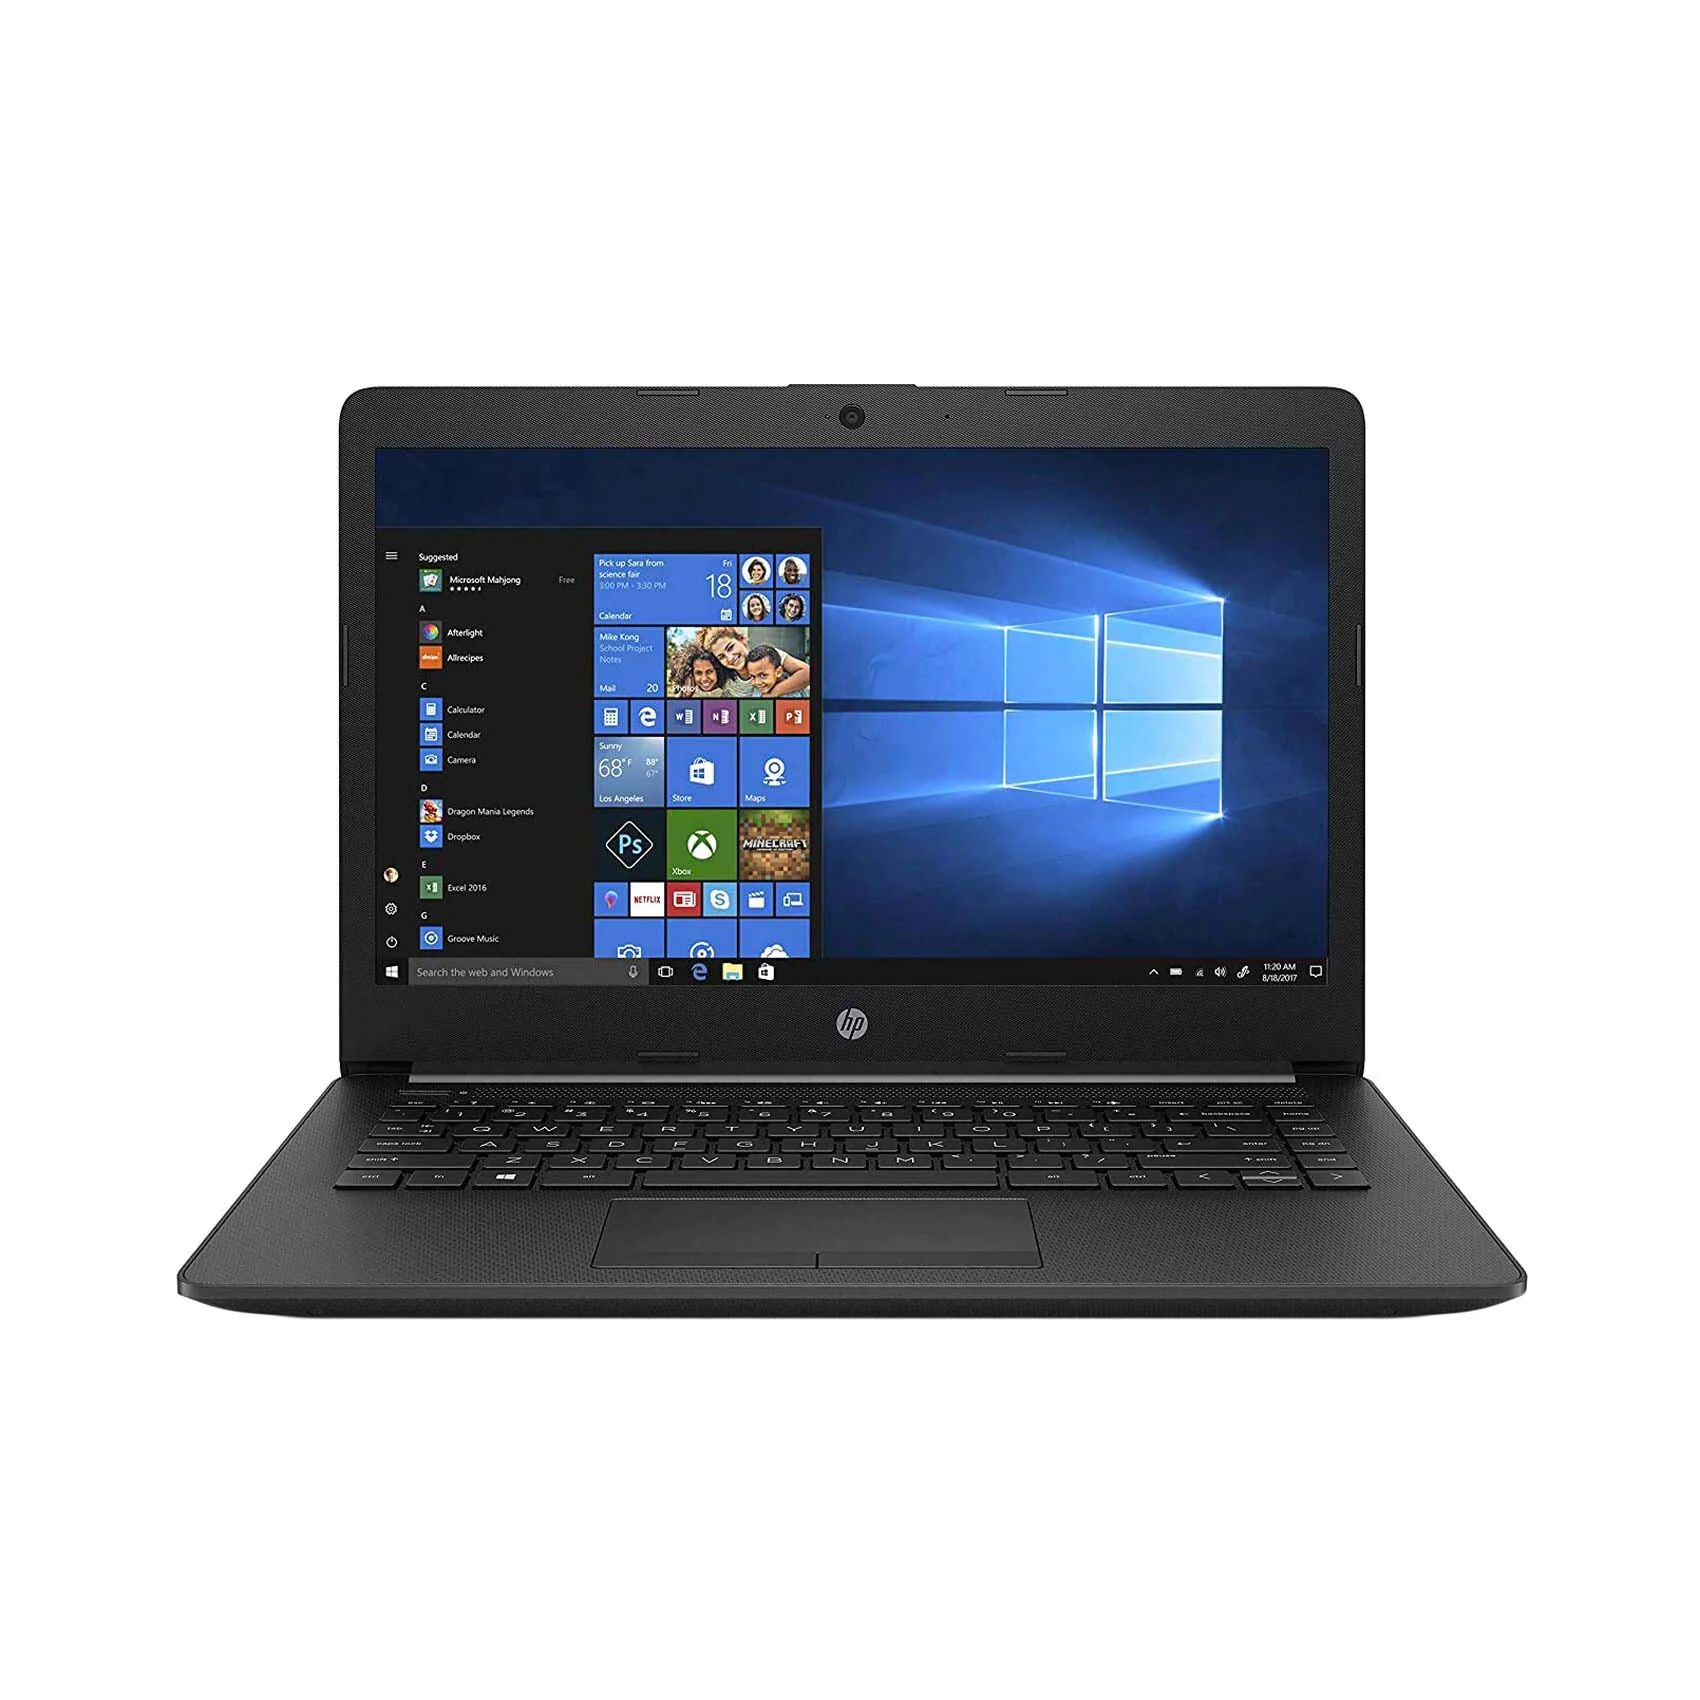 Laptops Promotions offer - in Amman #2051 - 1  image 